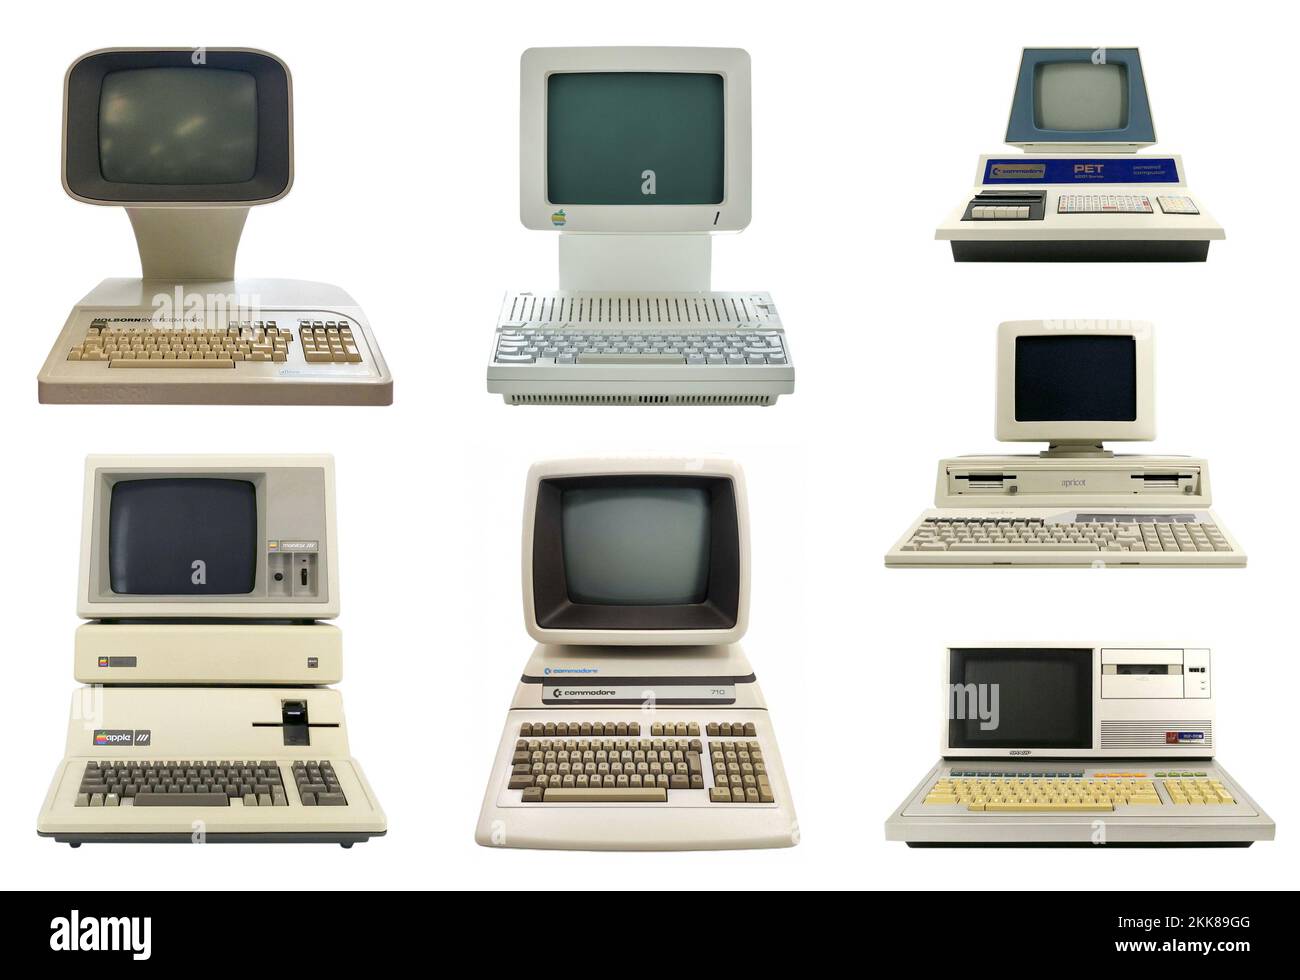 Set of vintage desktop computers from the eighties isolated on white background. Retro PC collection front view Stock Photo